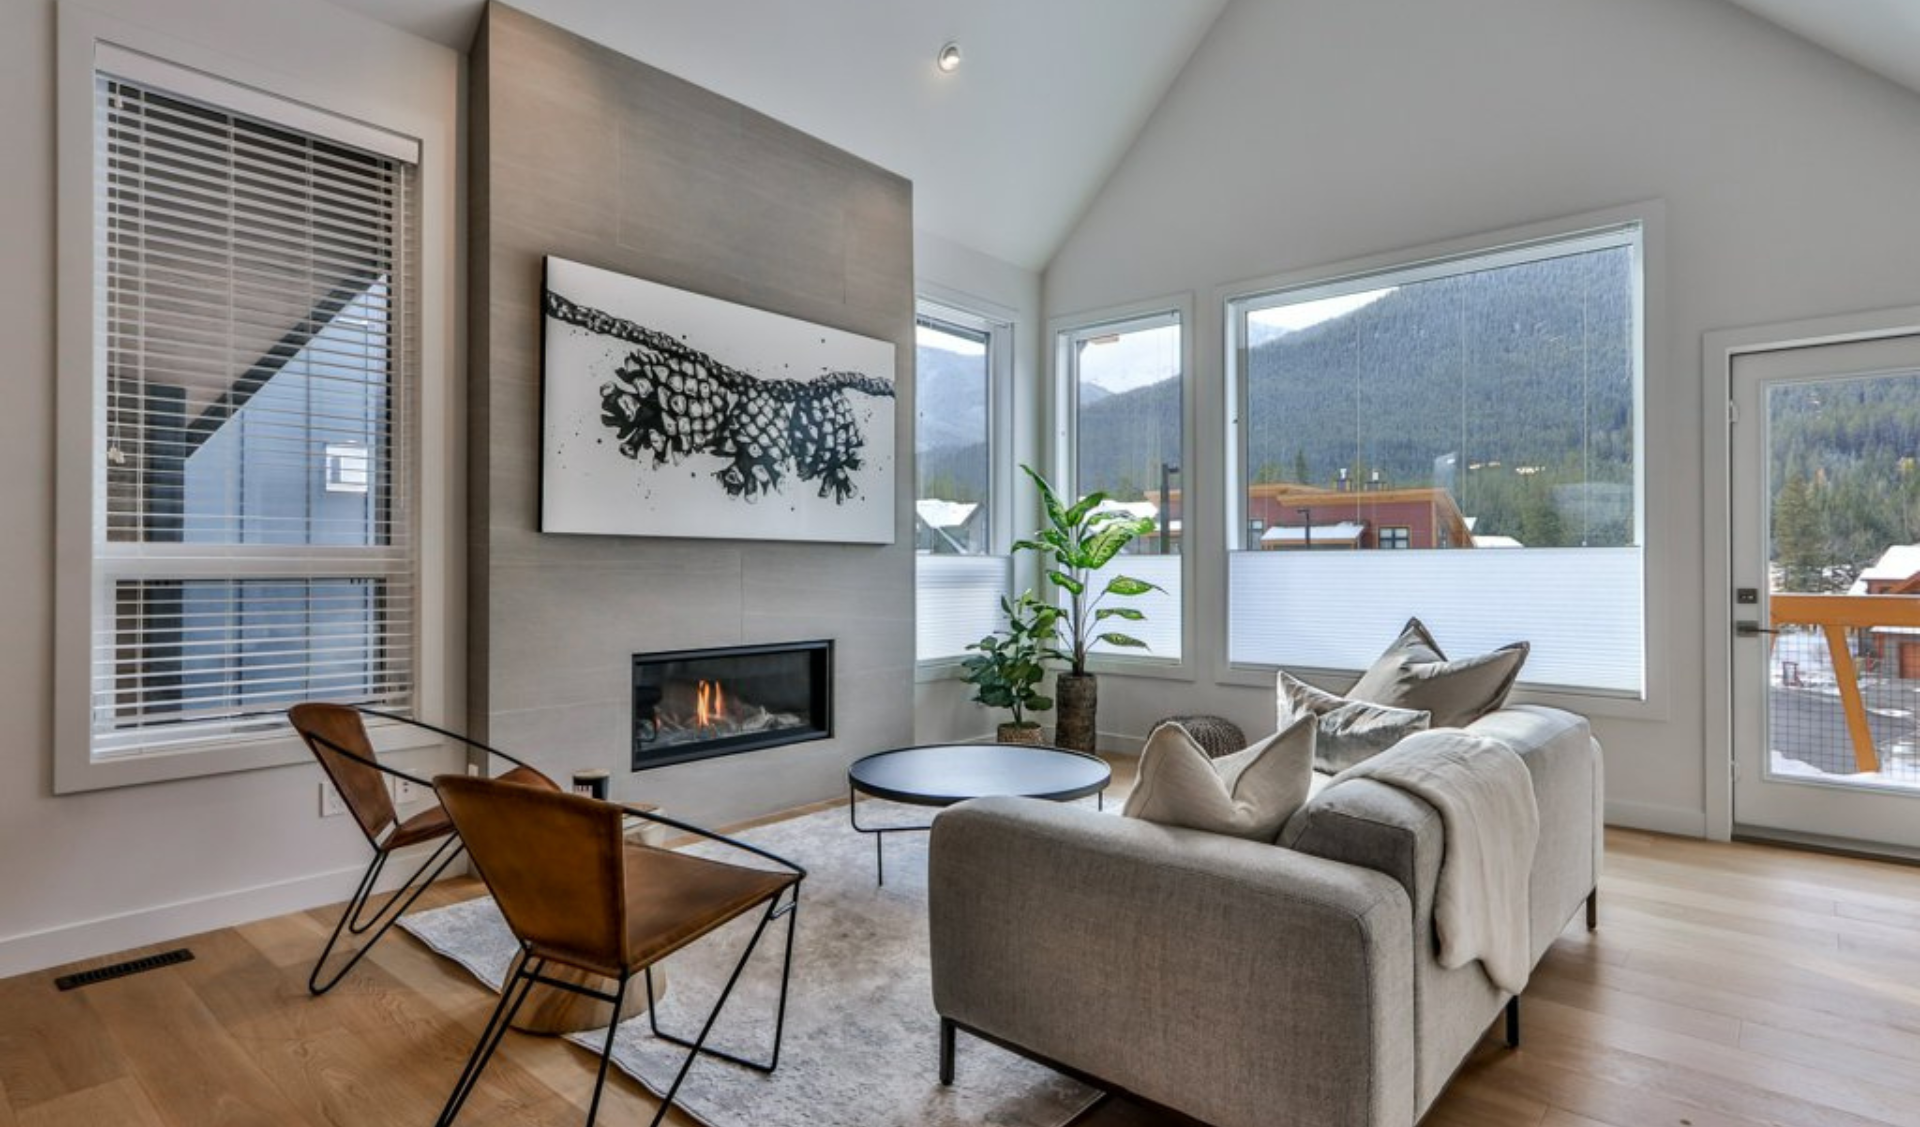 Ashton Construction Services (ACS) Projects - The Slopes at Stewart Creek - Canmore, Alberta - Canmore HD Photography 4